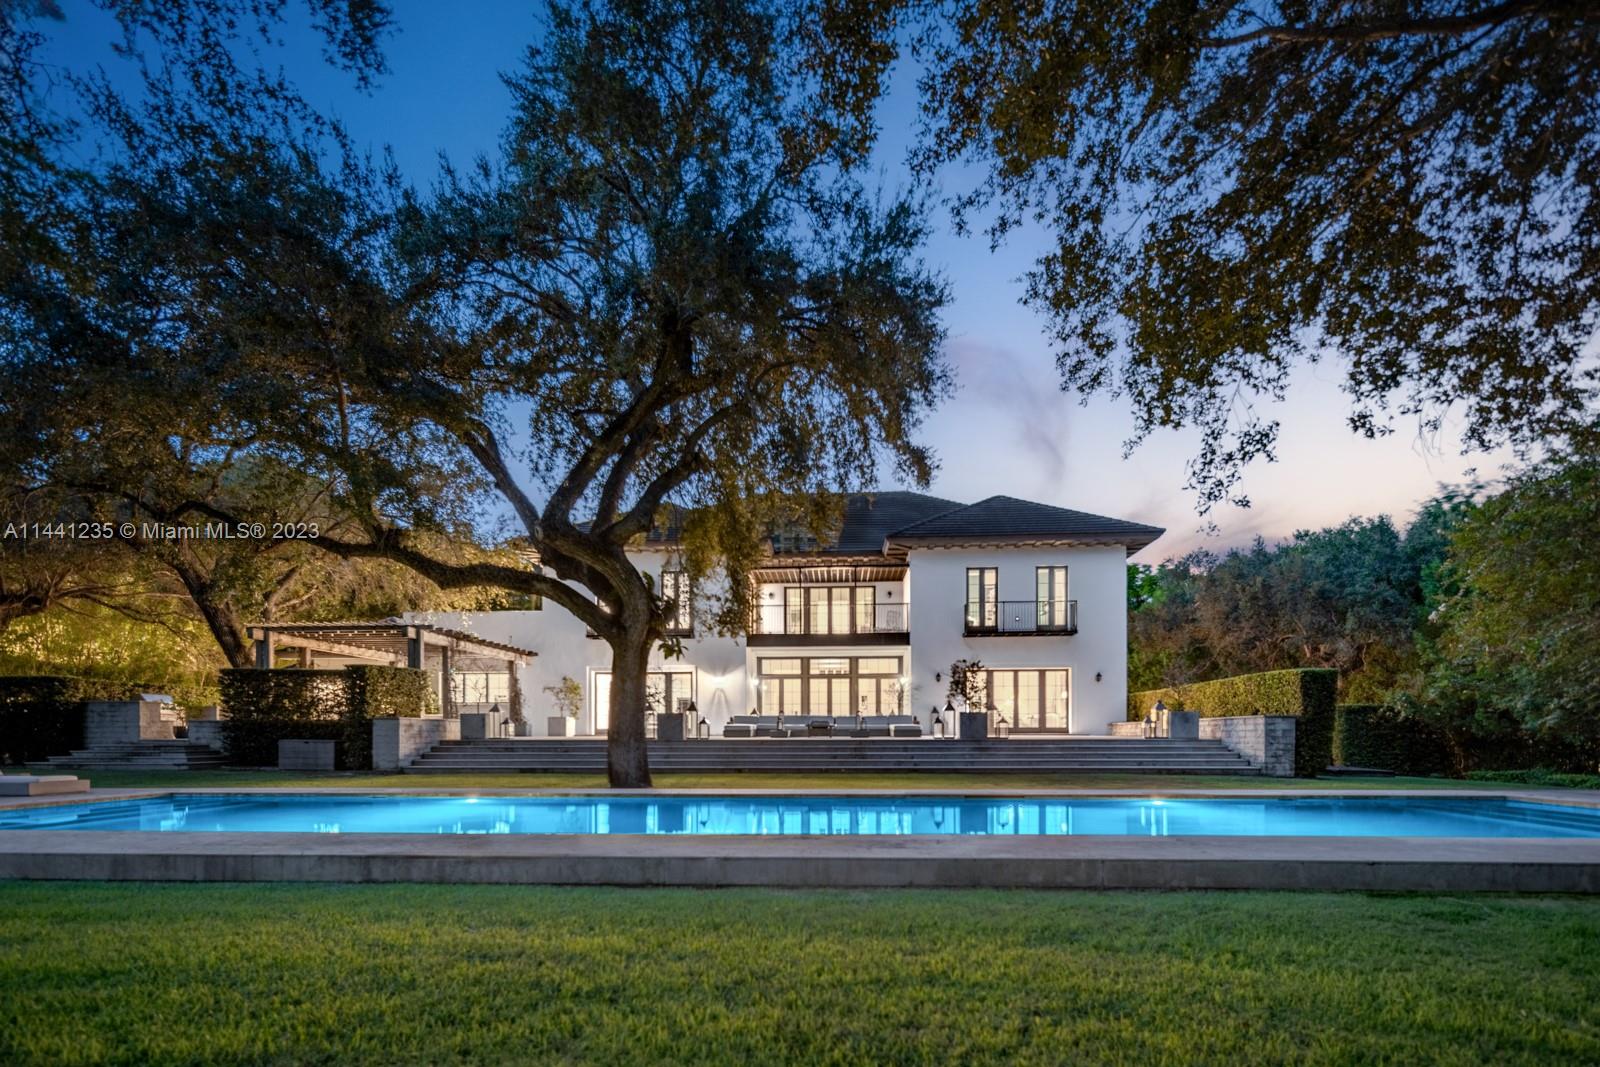 This sophisticated contemporary estate is set on 1.71 acres (74,525 sf lot) of lush grounds designed by Enzo Enea with architecture by Chad Oppenheim. Located in the exclusive gated community of Journey’s End Estates and designed by AD100 Sawyer | Berson. High ceilings and abundant light throughout. The interior portion spans 8,935 
sf with 6 bedrooms and 6.5 bathrooms, primary suite with 2 large walk-in closets, a sweeping living/dining/entertaining area, an ample chef’s kitchen, a separate office space and a library. Large saltwater pool, private dock and tennis courts exclusive to Journey’s End. This house was completely renovated in 2017. A great estate for art collectors.